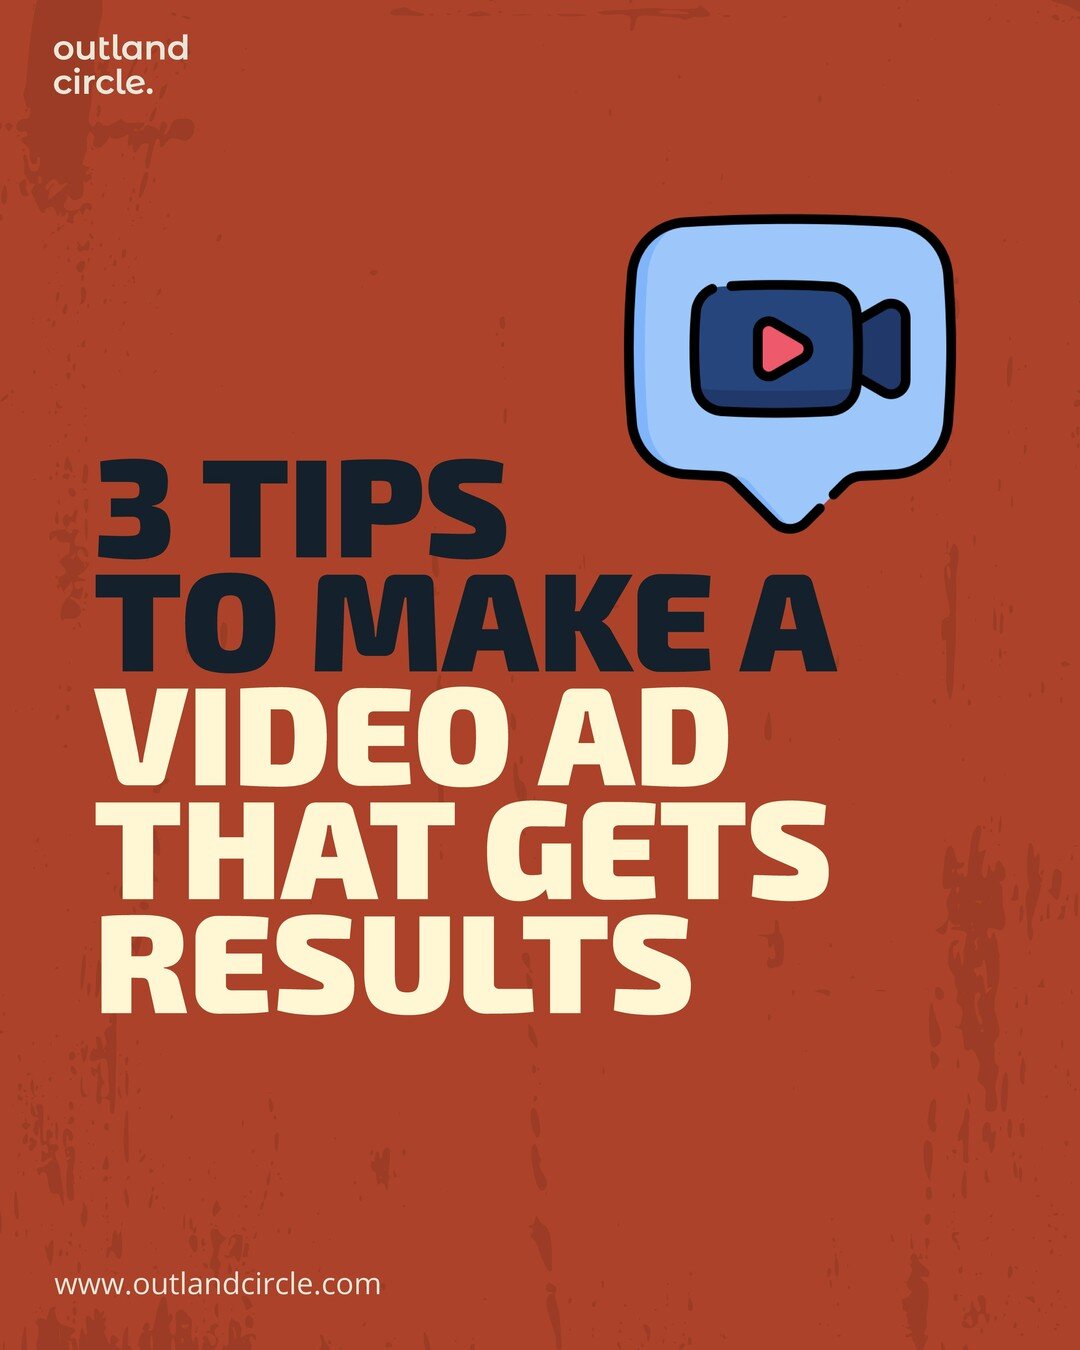 One of the best ways to engage consumers is with video. You know this. But not just any video. Here's how you make videos that kick ass.

If you enjoyed this post, give it a like ❤ It helps us more than you think.

.

.

.

#outland #outlandcircle #s